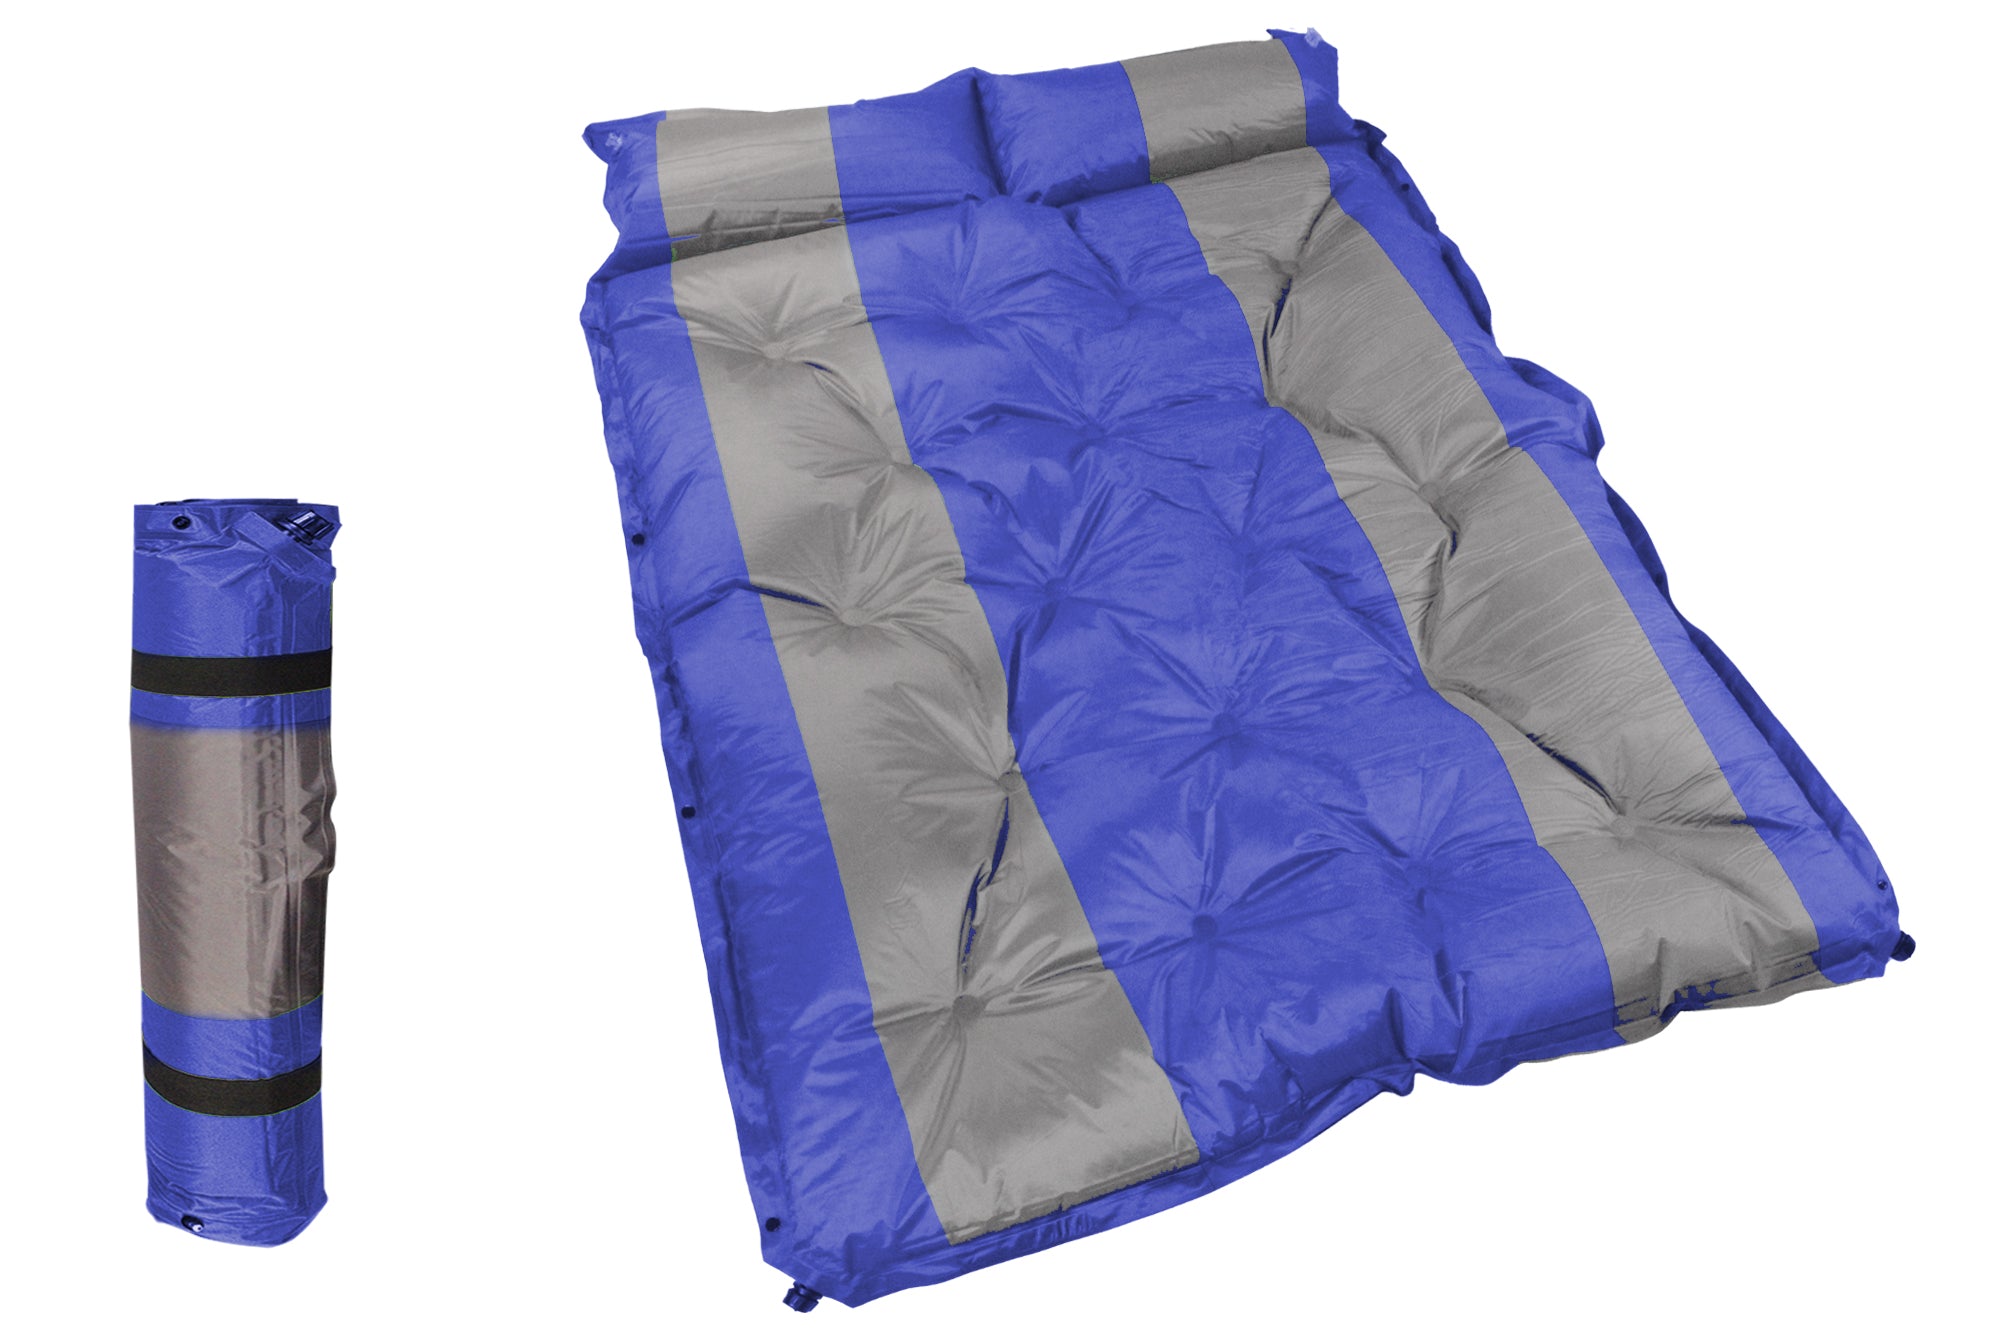 184x120cm Self-Inflating Double Camping Mattress with Inflatable Headrests